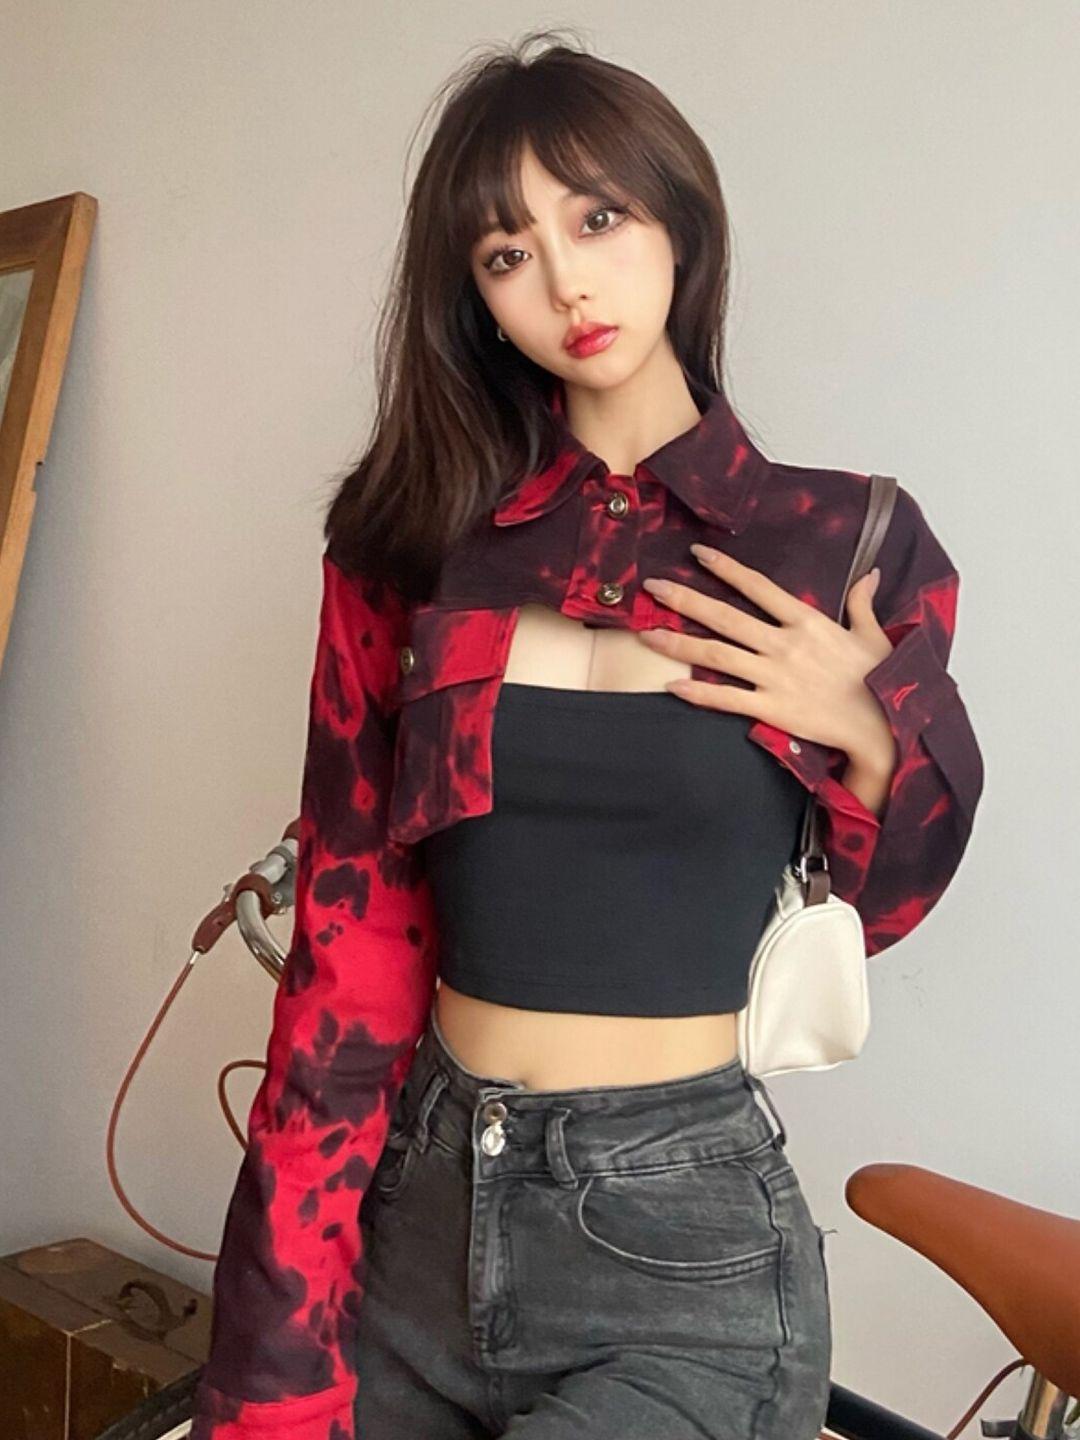 stylecast-x-kpop-floral-printed-shirt-collar-cuffed-sleeves-cotton-shirt-style-crop-top